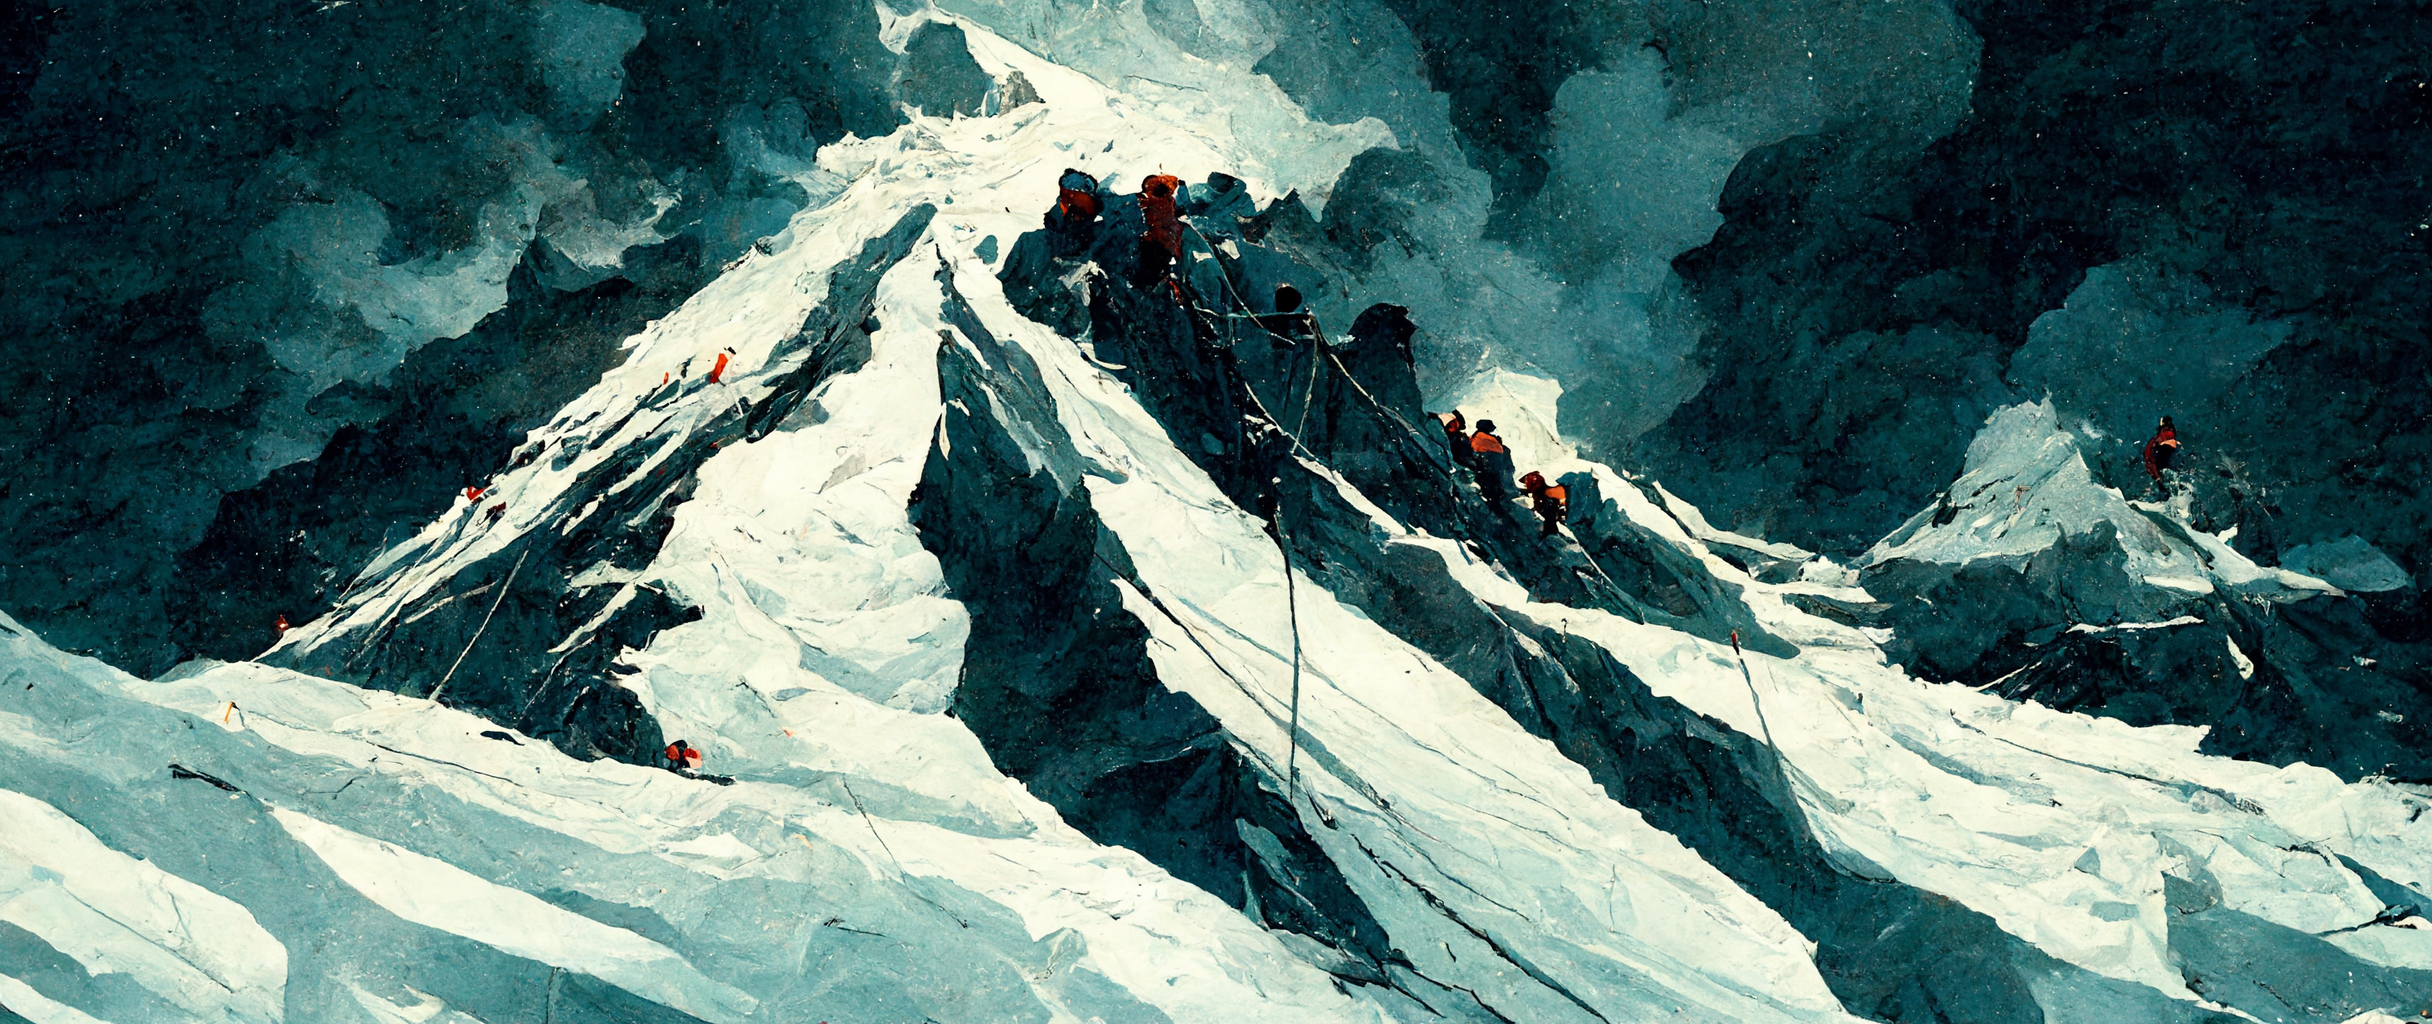 vibe_group_of_explorers_climbing_mount_everest_ropes_head-torch_a63874d5-dfdf-4576-8b8b-ad8dff6d3428